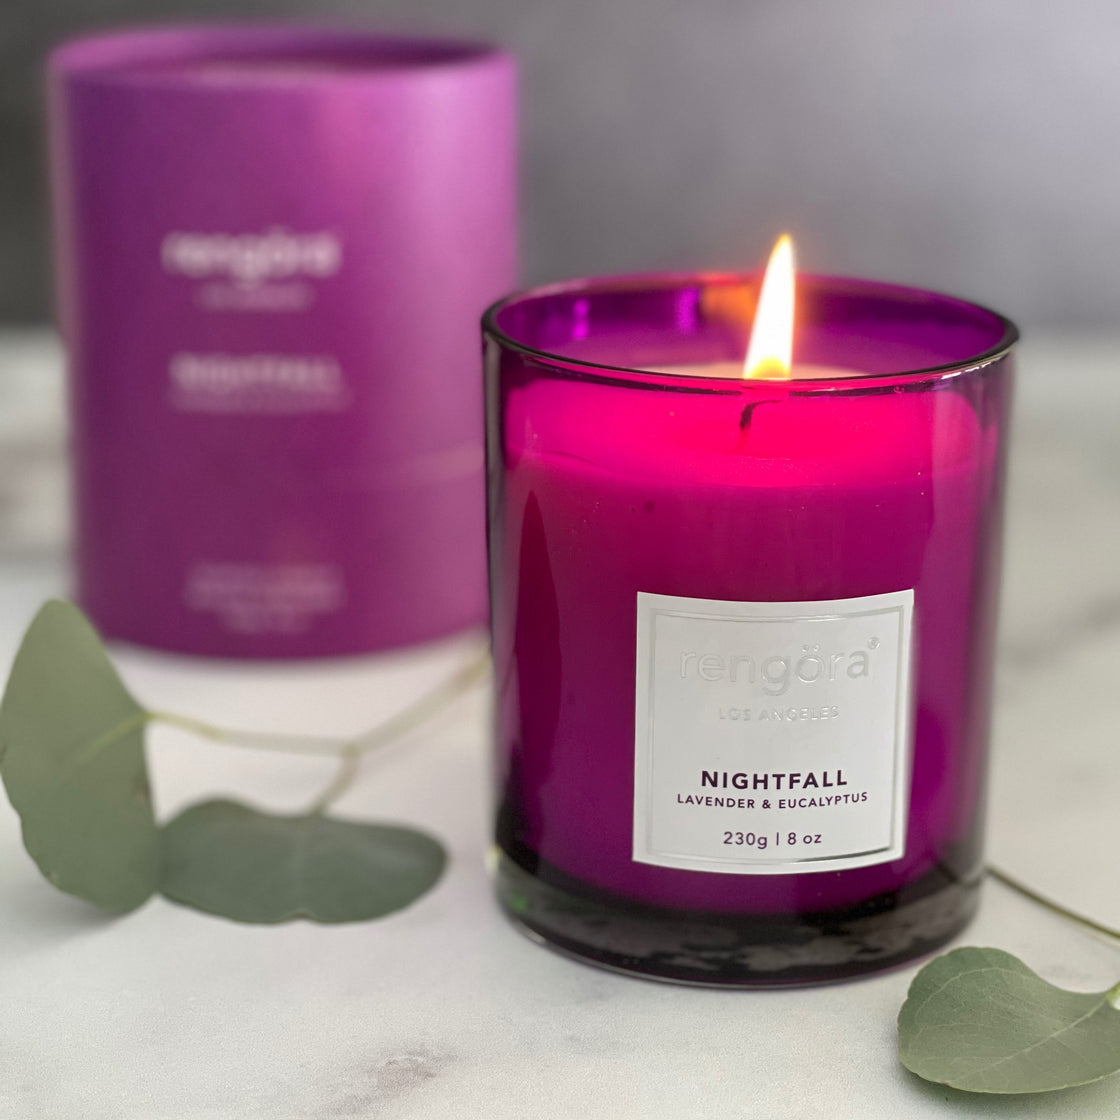 Nightfall: Lavender & Eucalyptus scented soy wax candle with eucalyptus leaves and beautiful purple packaging